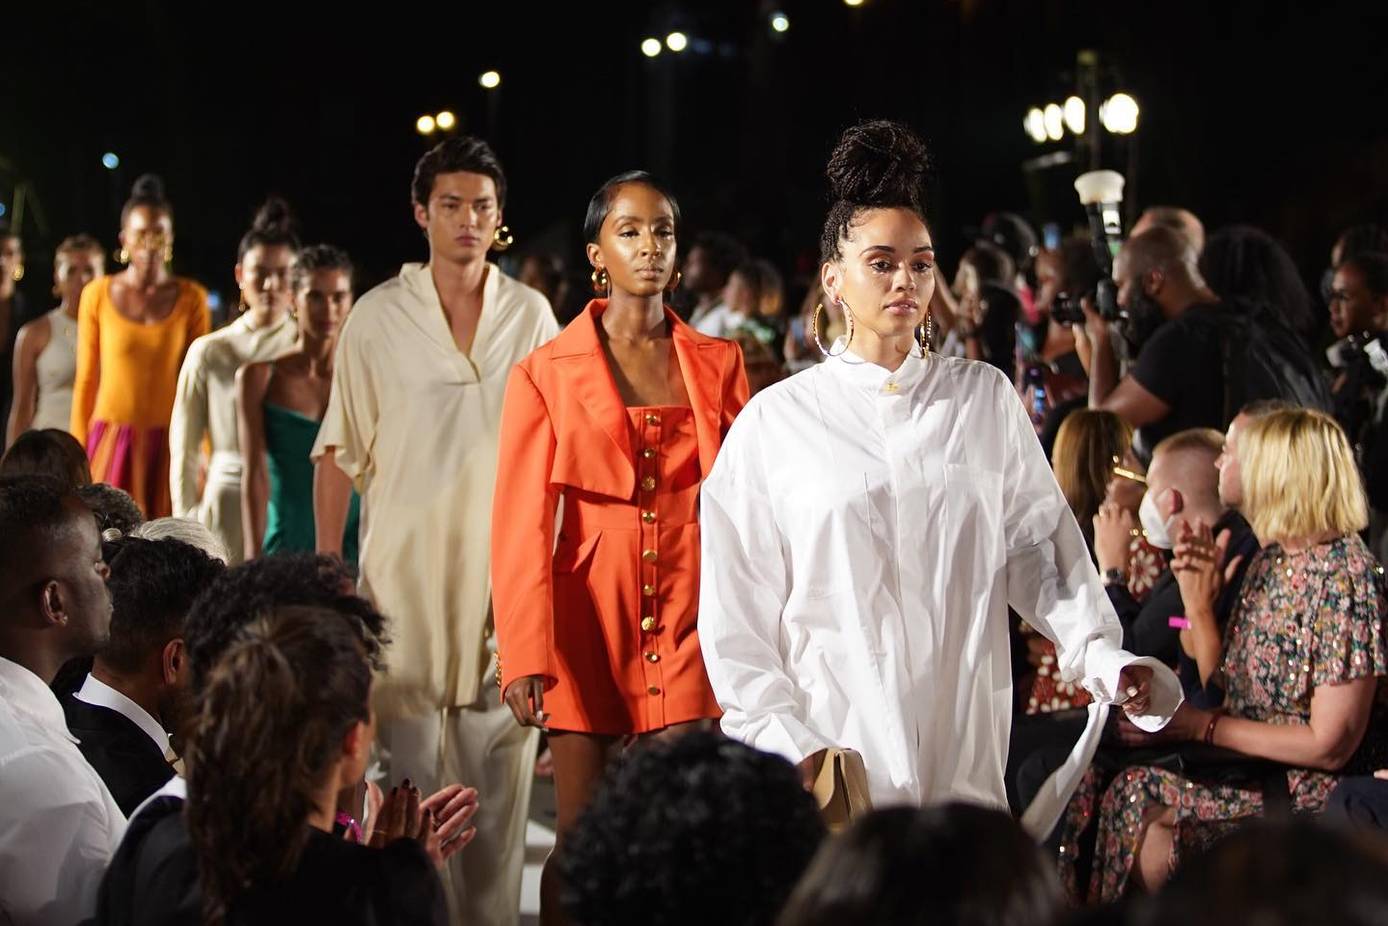 Harlem's Fashion Row partners with LVMH to support BIPOC designers